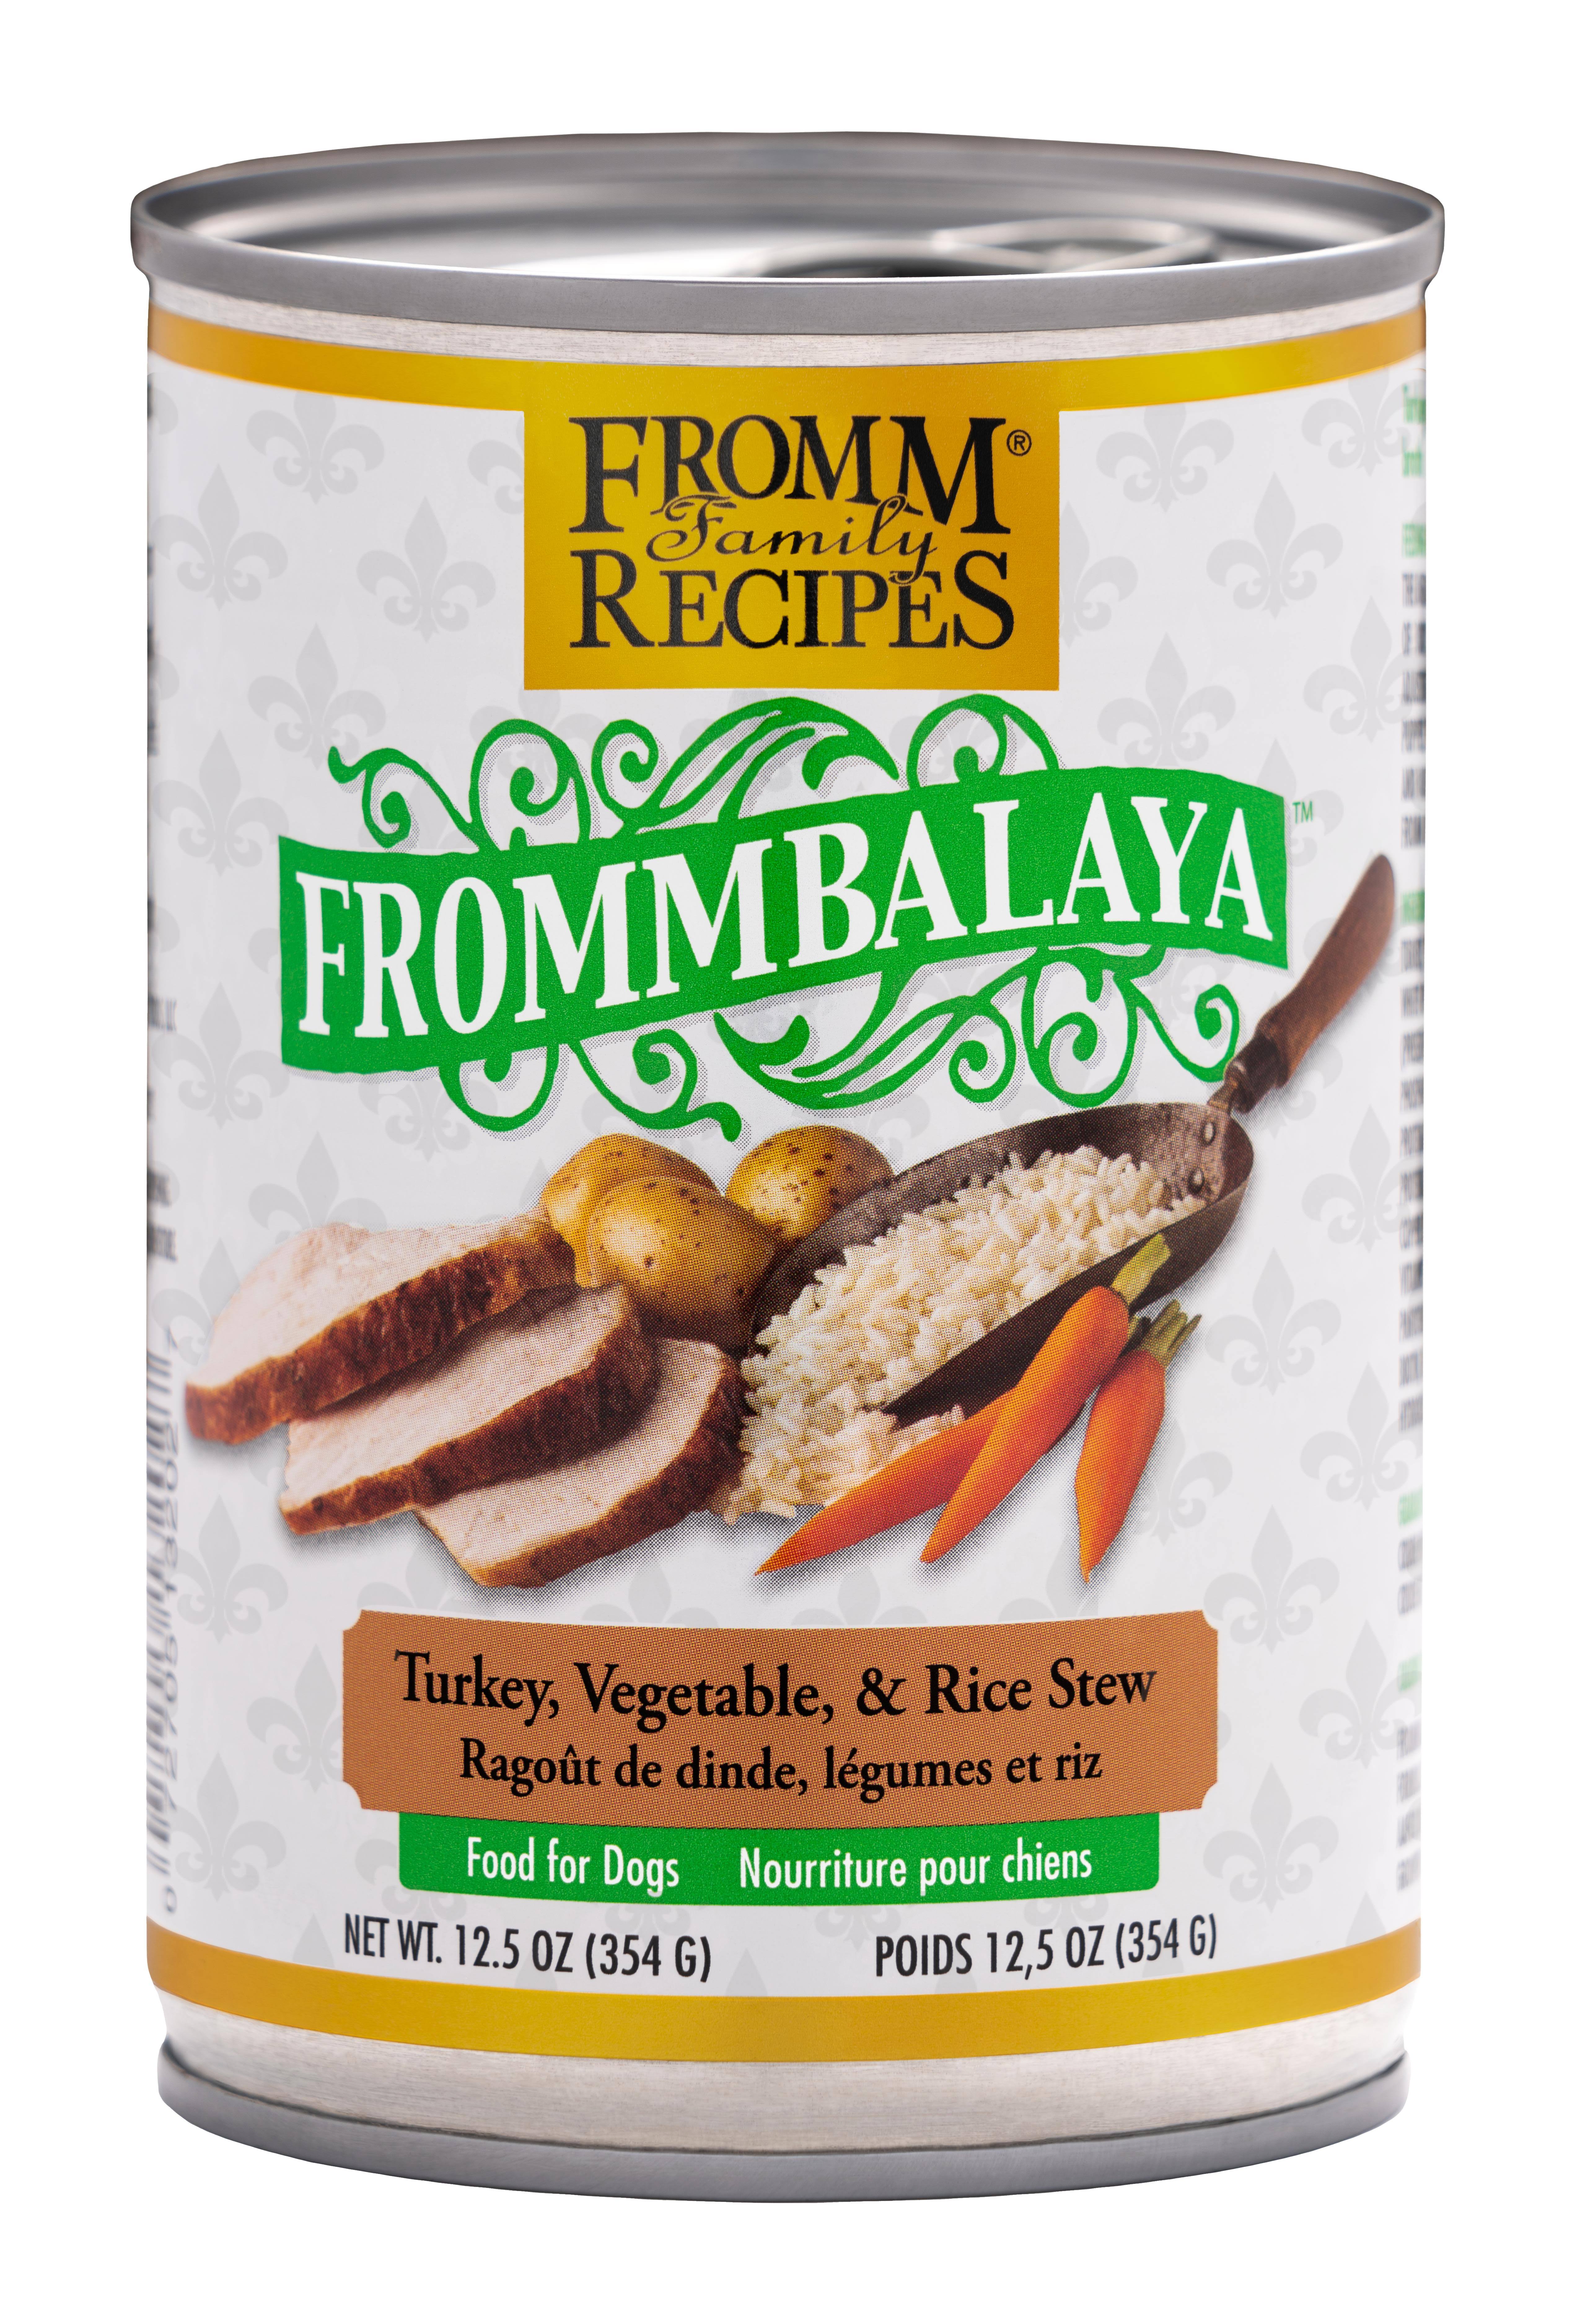 Fromm Frommbalaya Turkey, Vegetable, Rice Stew Canned Dog Food - 12.5 oz, Case of 12